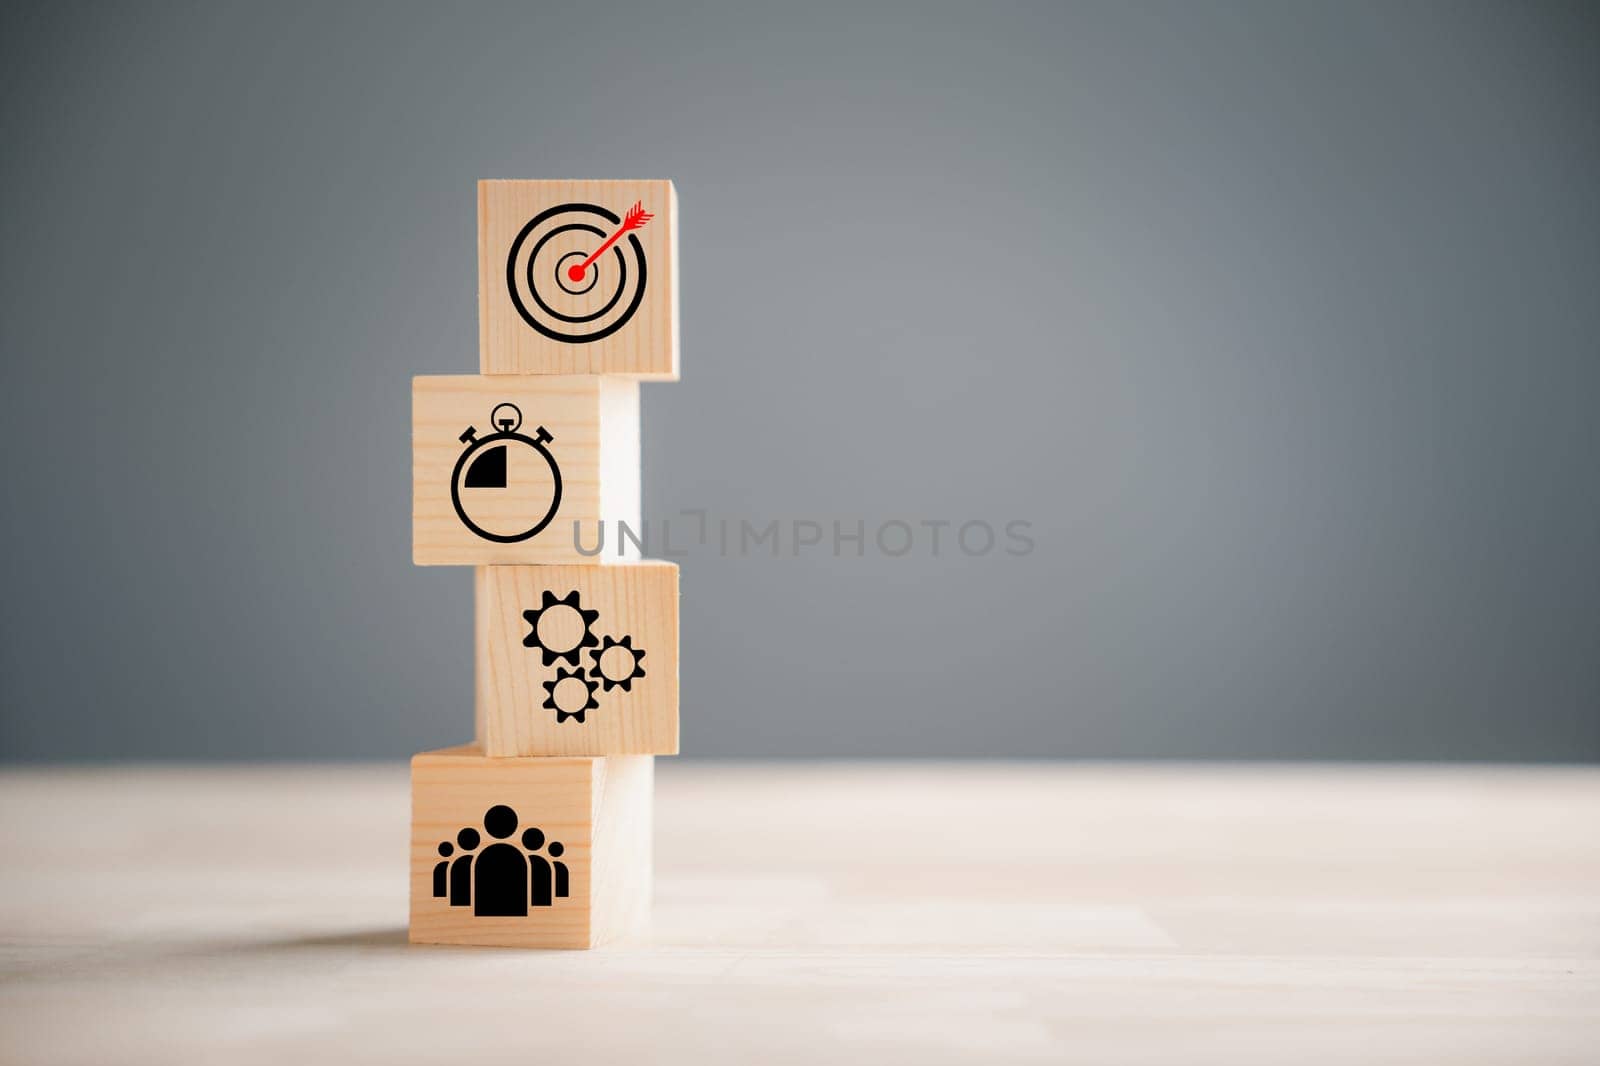 Business target concept with wooden block step. Action Plan and Goal icons represent success. Company strategy and project management on a table. Teamwork background.